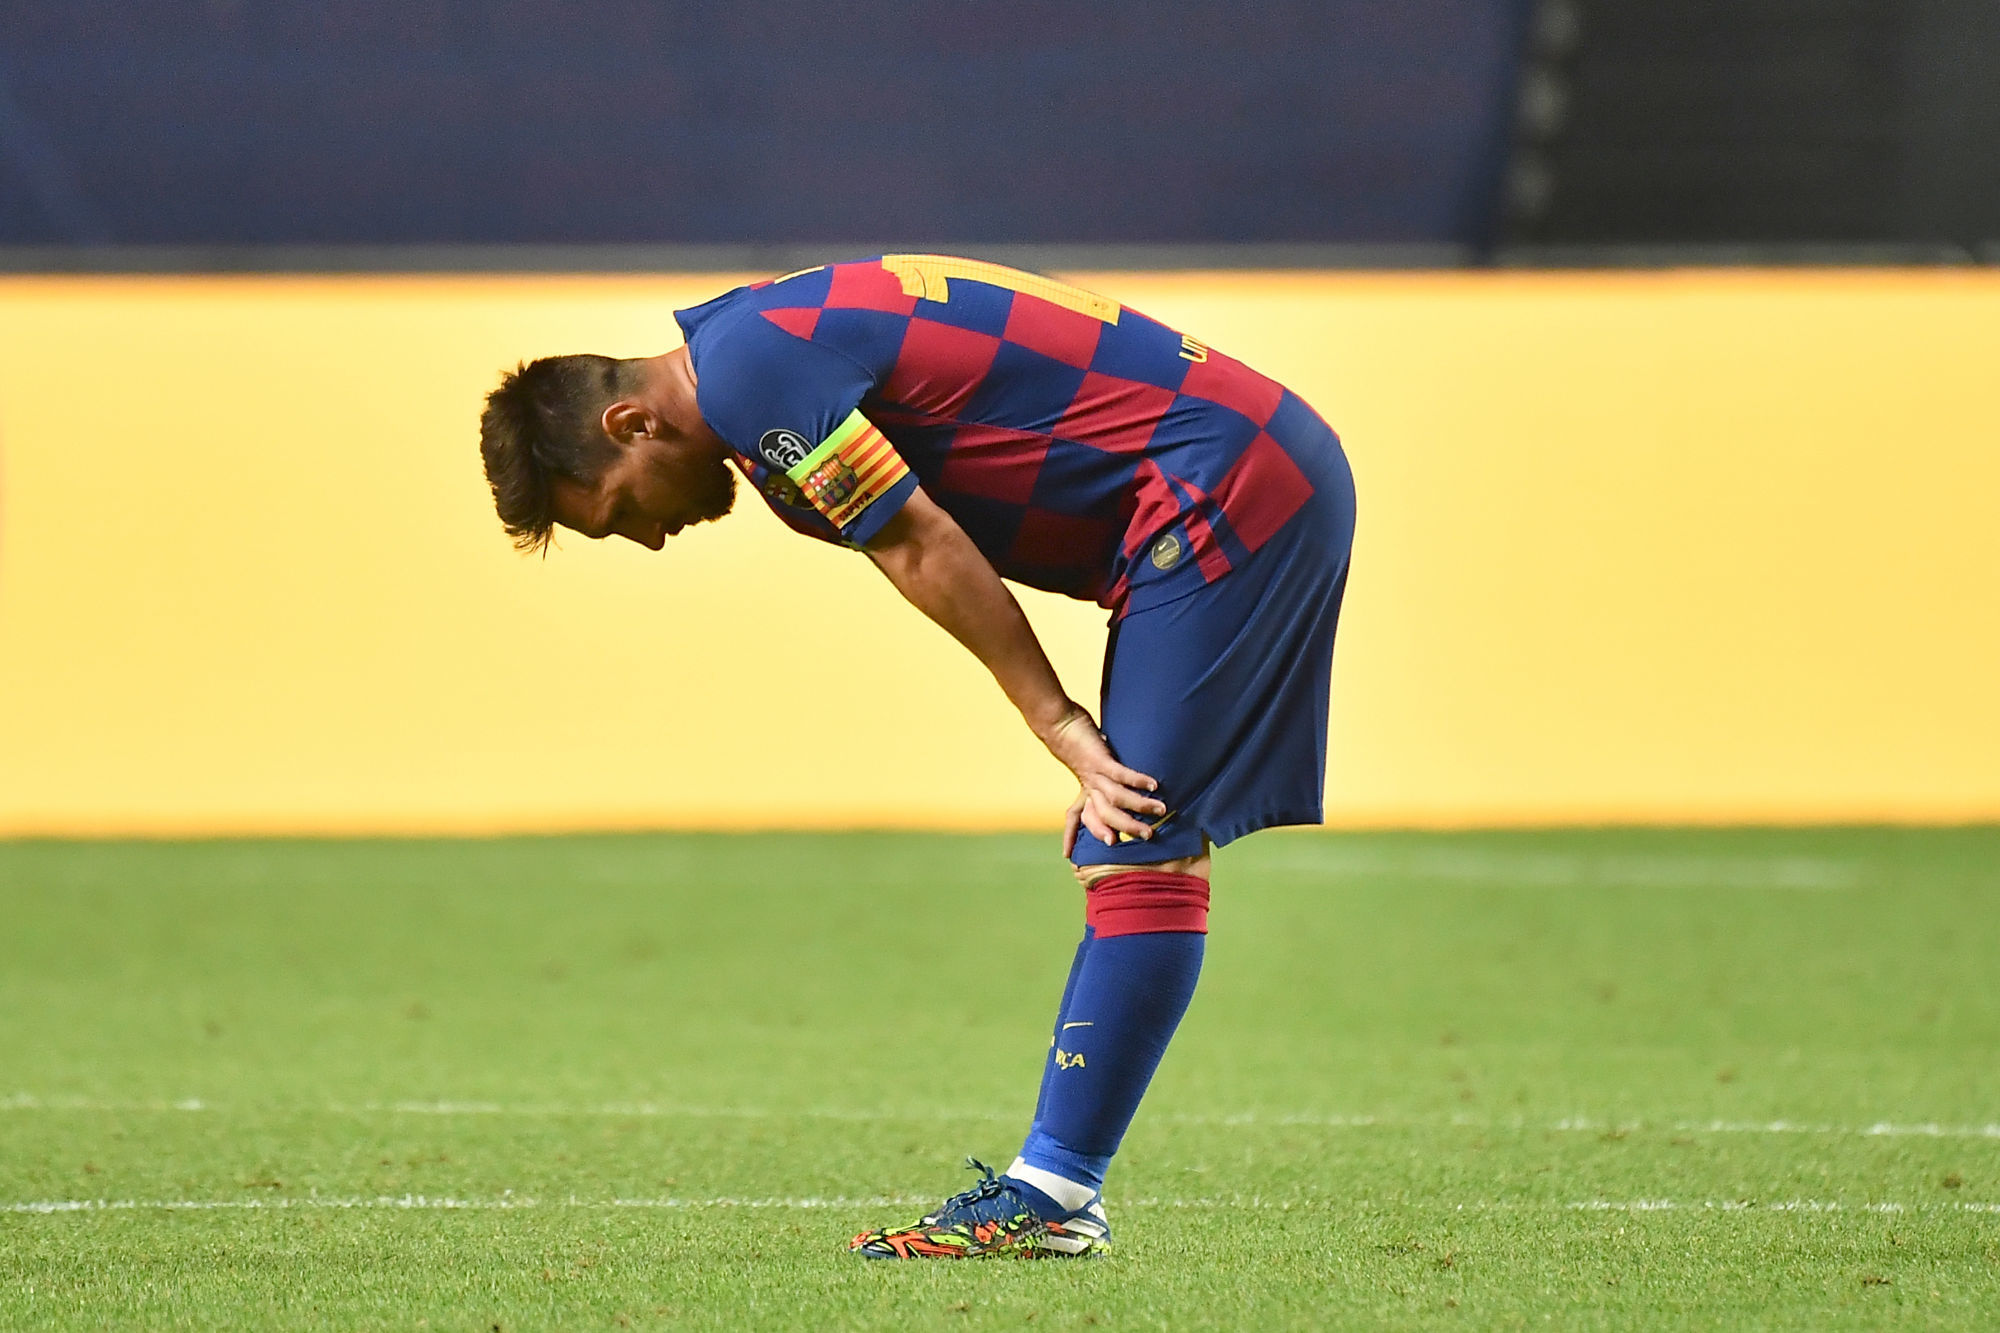 firo Champions League: 08/14/2020 1/4 final, quarter-final FC Bayern Munich, Munchen - FC Barcelona 8: 2 Lionel MESSI, whole figure, disappointment, disappointed, frustrated. PHOTO: Frank Hoermann / SVEN SIMON / Pool / via / firosportphoto #NO use of any use photographs as image sequences and / or quasi-video # #Editorial Use ONLY # #National and International News Agencies OUT # Our terms and conditions apply, can be viewed at www.firosportphoto.de, ßONLY FOR USE IN GERMANY !!!!!!, copyright by firo sportphoto: Coesfelder Str. 207 D-48249 Dulmen www.firosportphoto.de mail@firosportphoto.de Account details: (V olksbank B ochum - W itten) IBAN: DE68430601290341117100 BIC: GENODEM1BOC Tel: + 49-2594-9916004 Fax: + 49-2594-9916005 | usage worldwide 
By Icon Sport - Lionel MESSI - Estàdio da Luz - Lisbonne (Portugal)